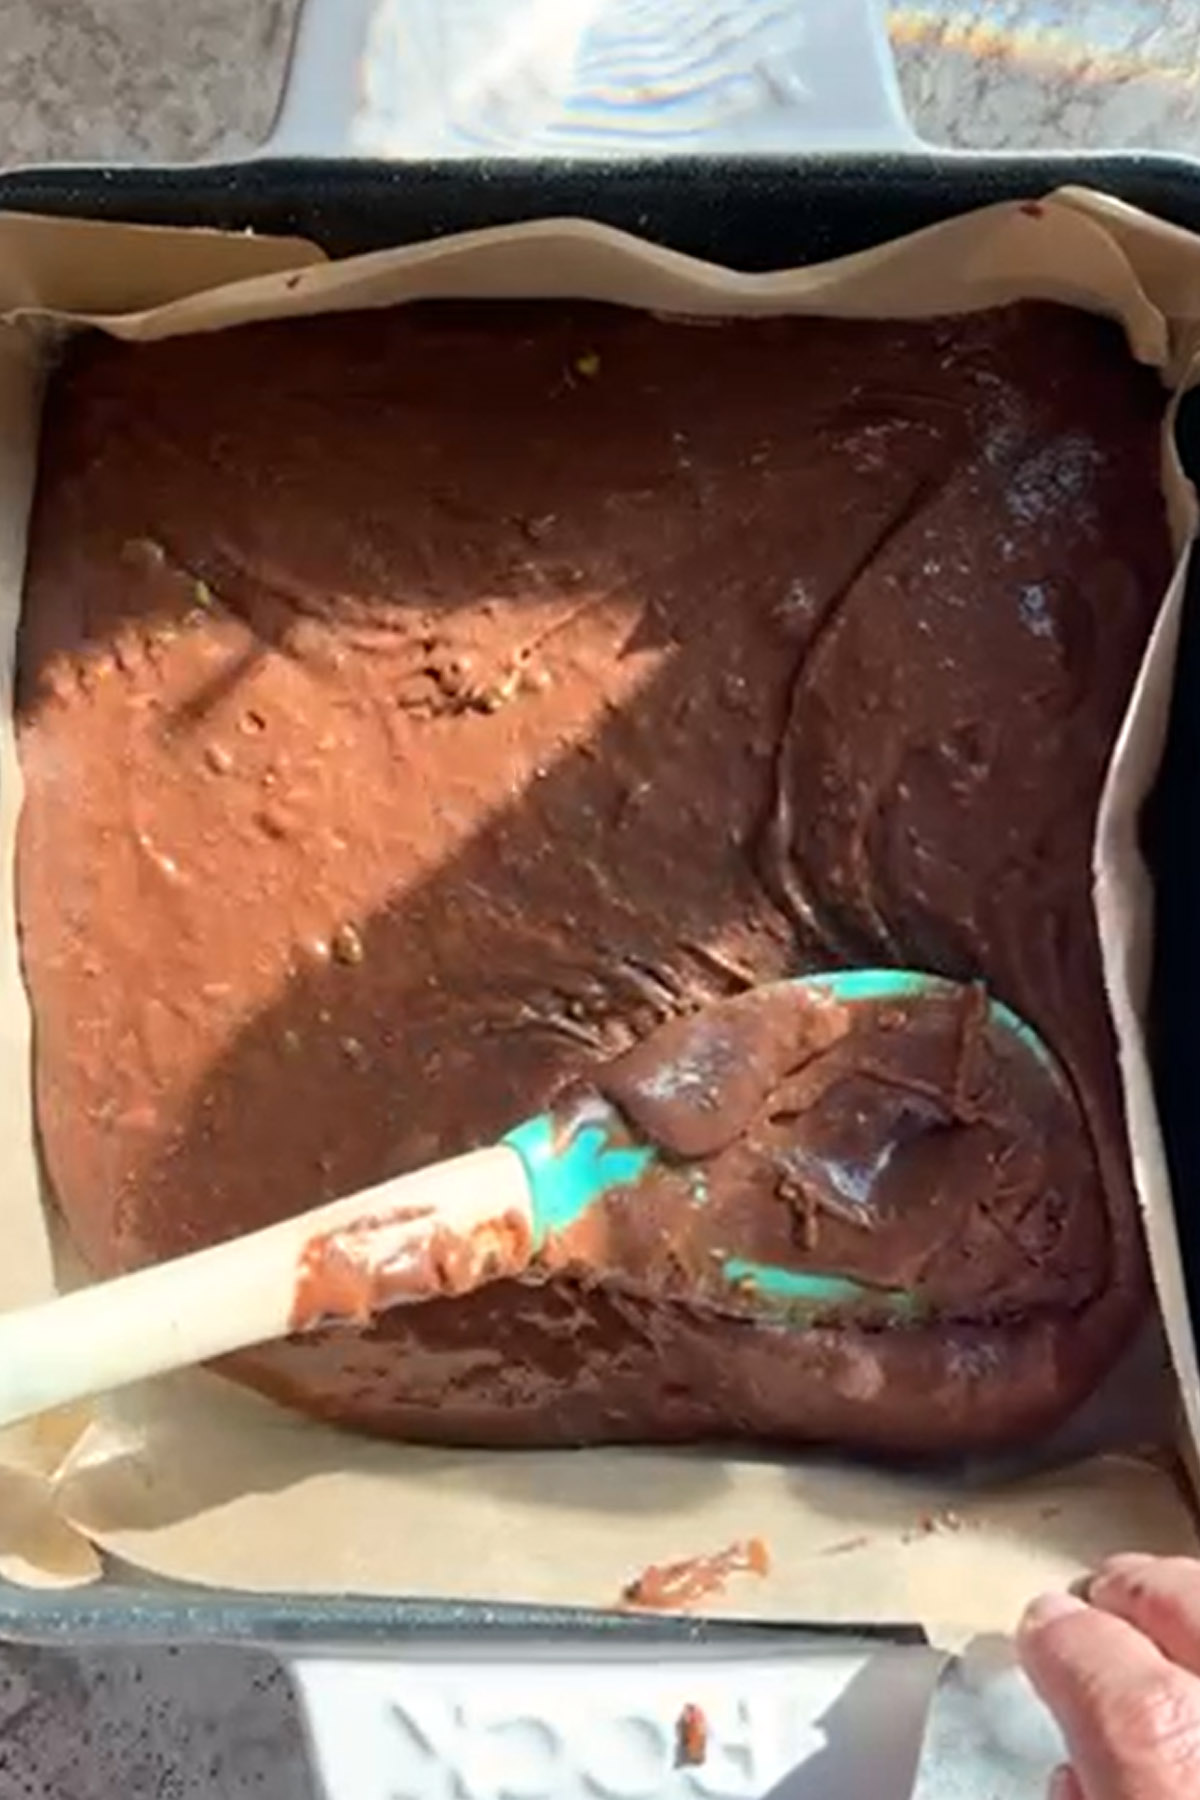 Brownie batter is spread smooth in a baking pan with a spatula.